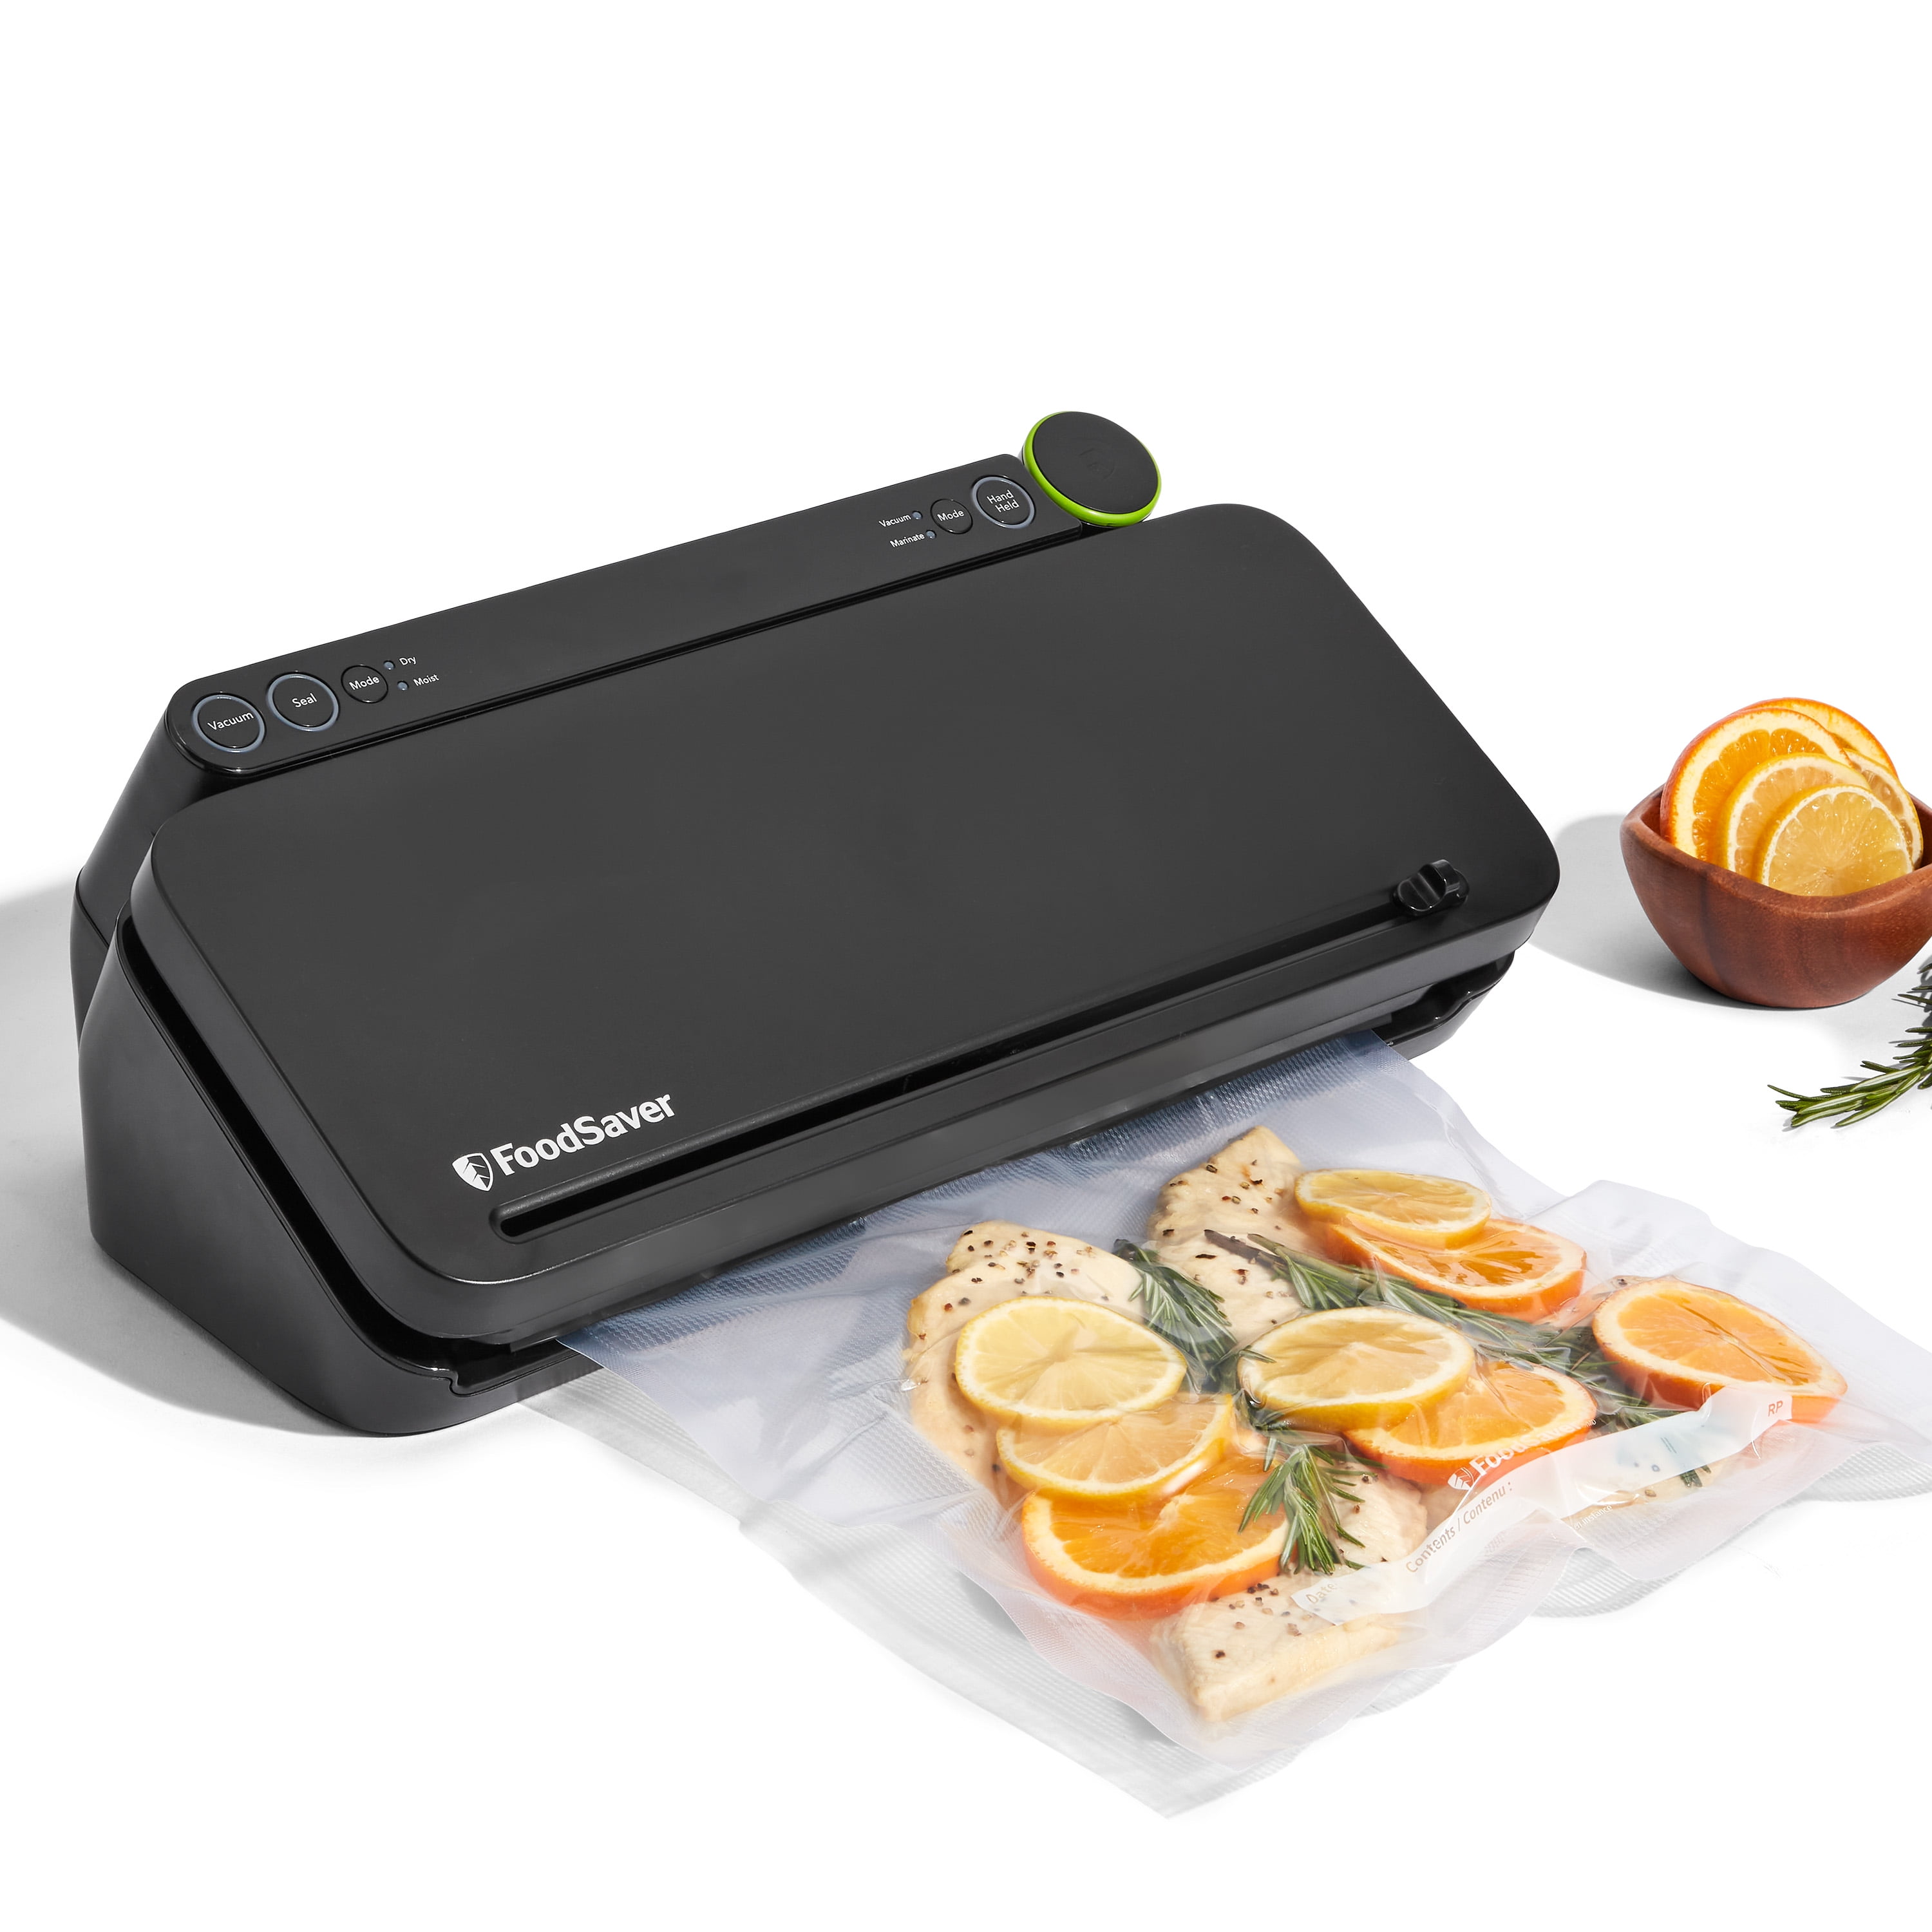 FoodSaver Multi-Use Food Preservation System with Built-In